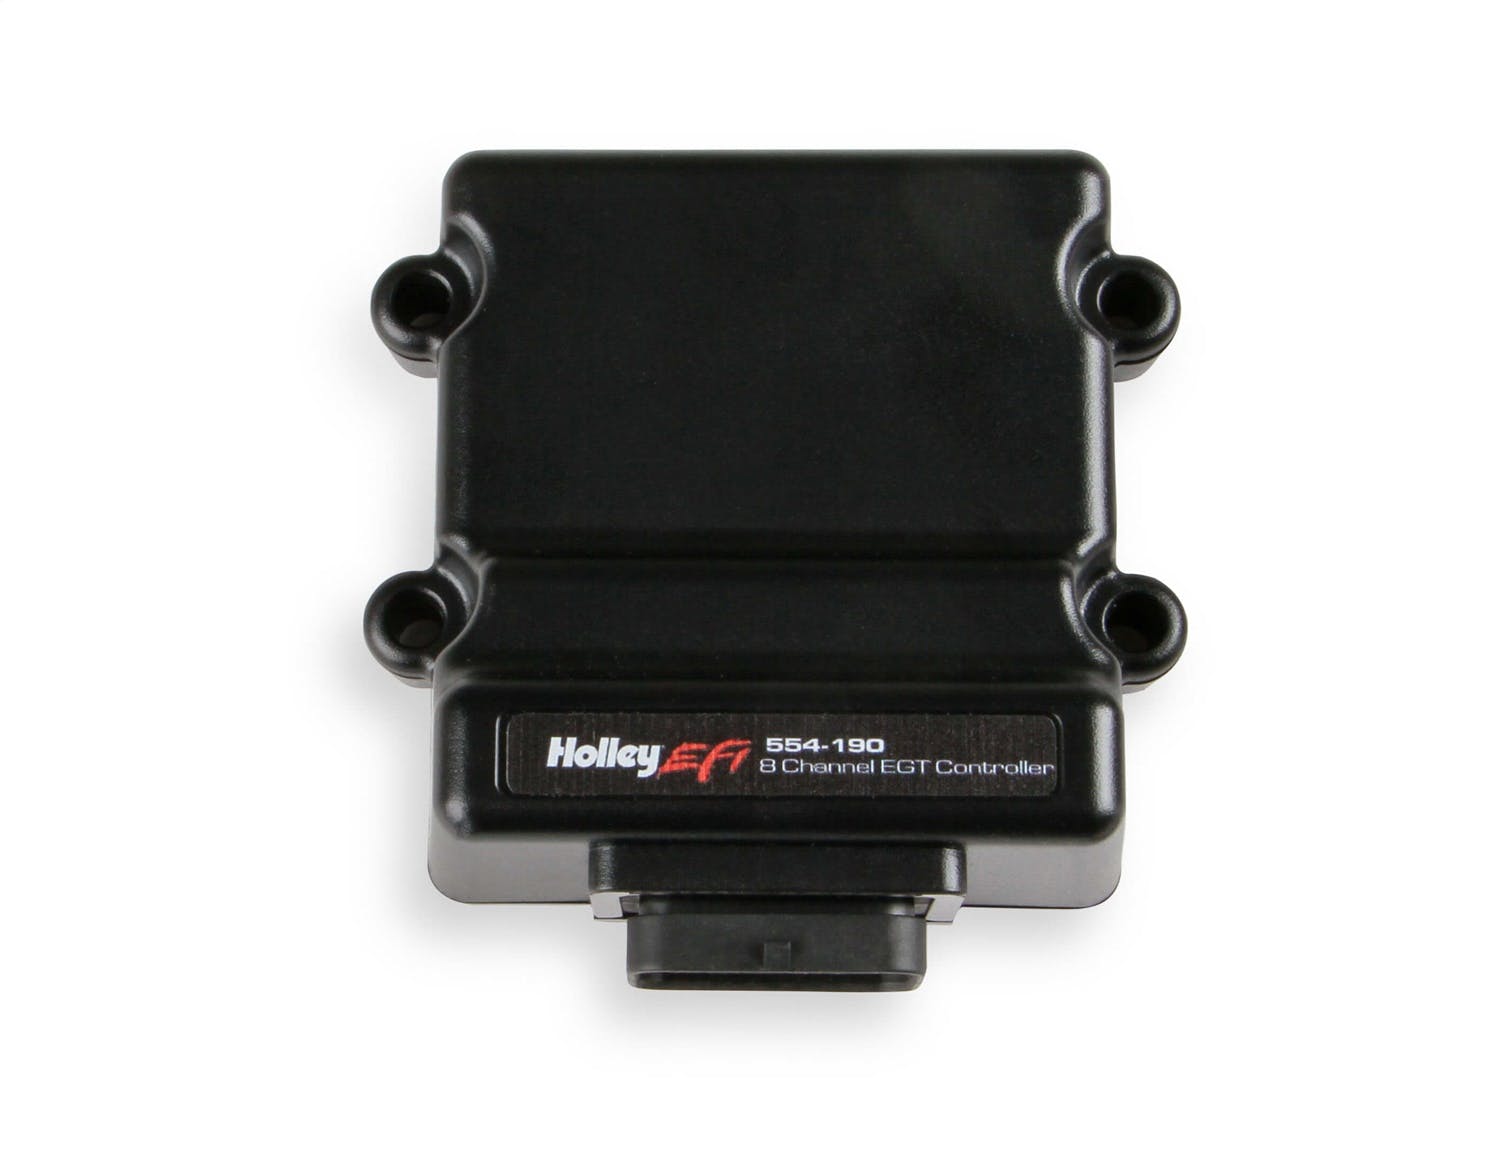 Holley EFI 554-190 CAN MODULE, 8 CHANNEL EGT CONTROLLER